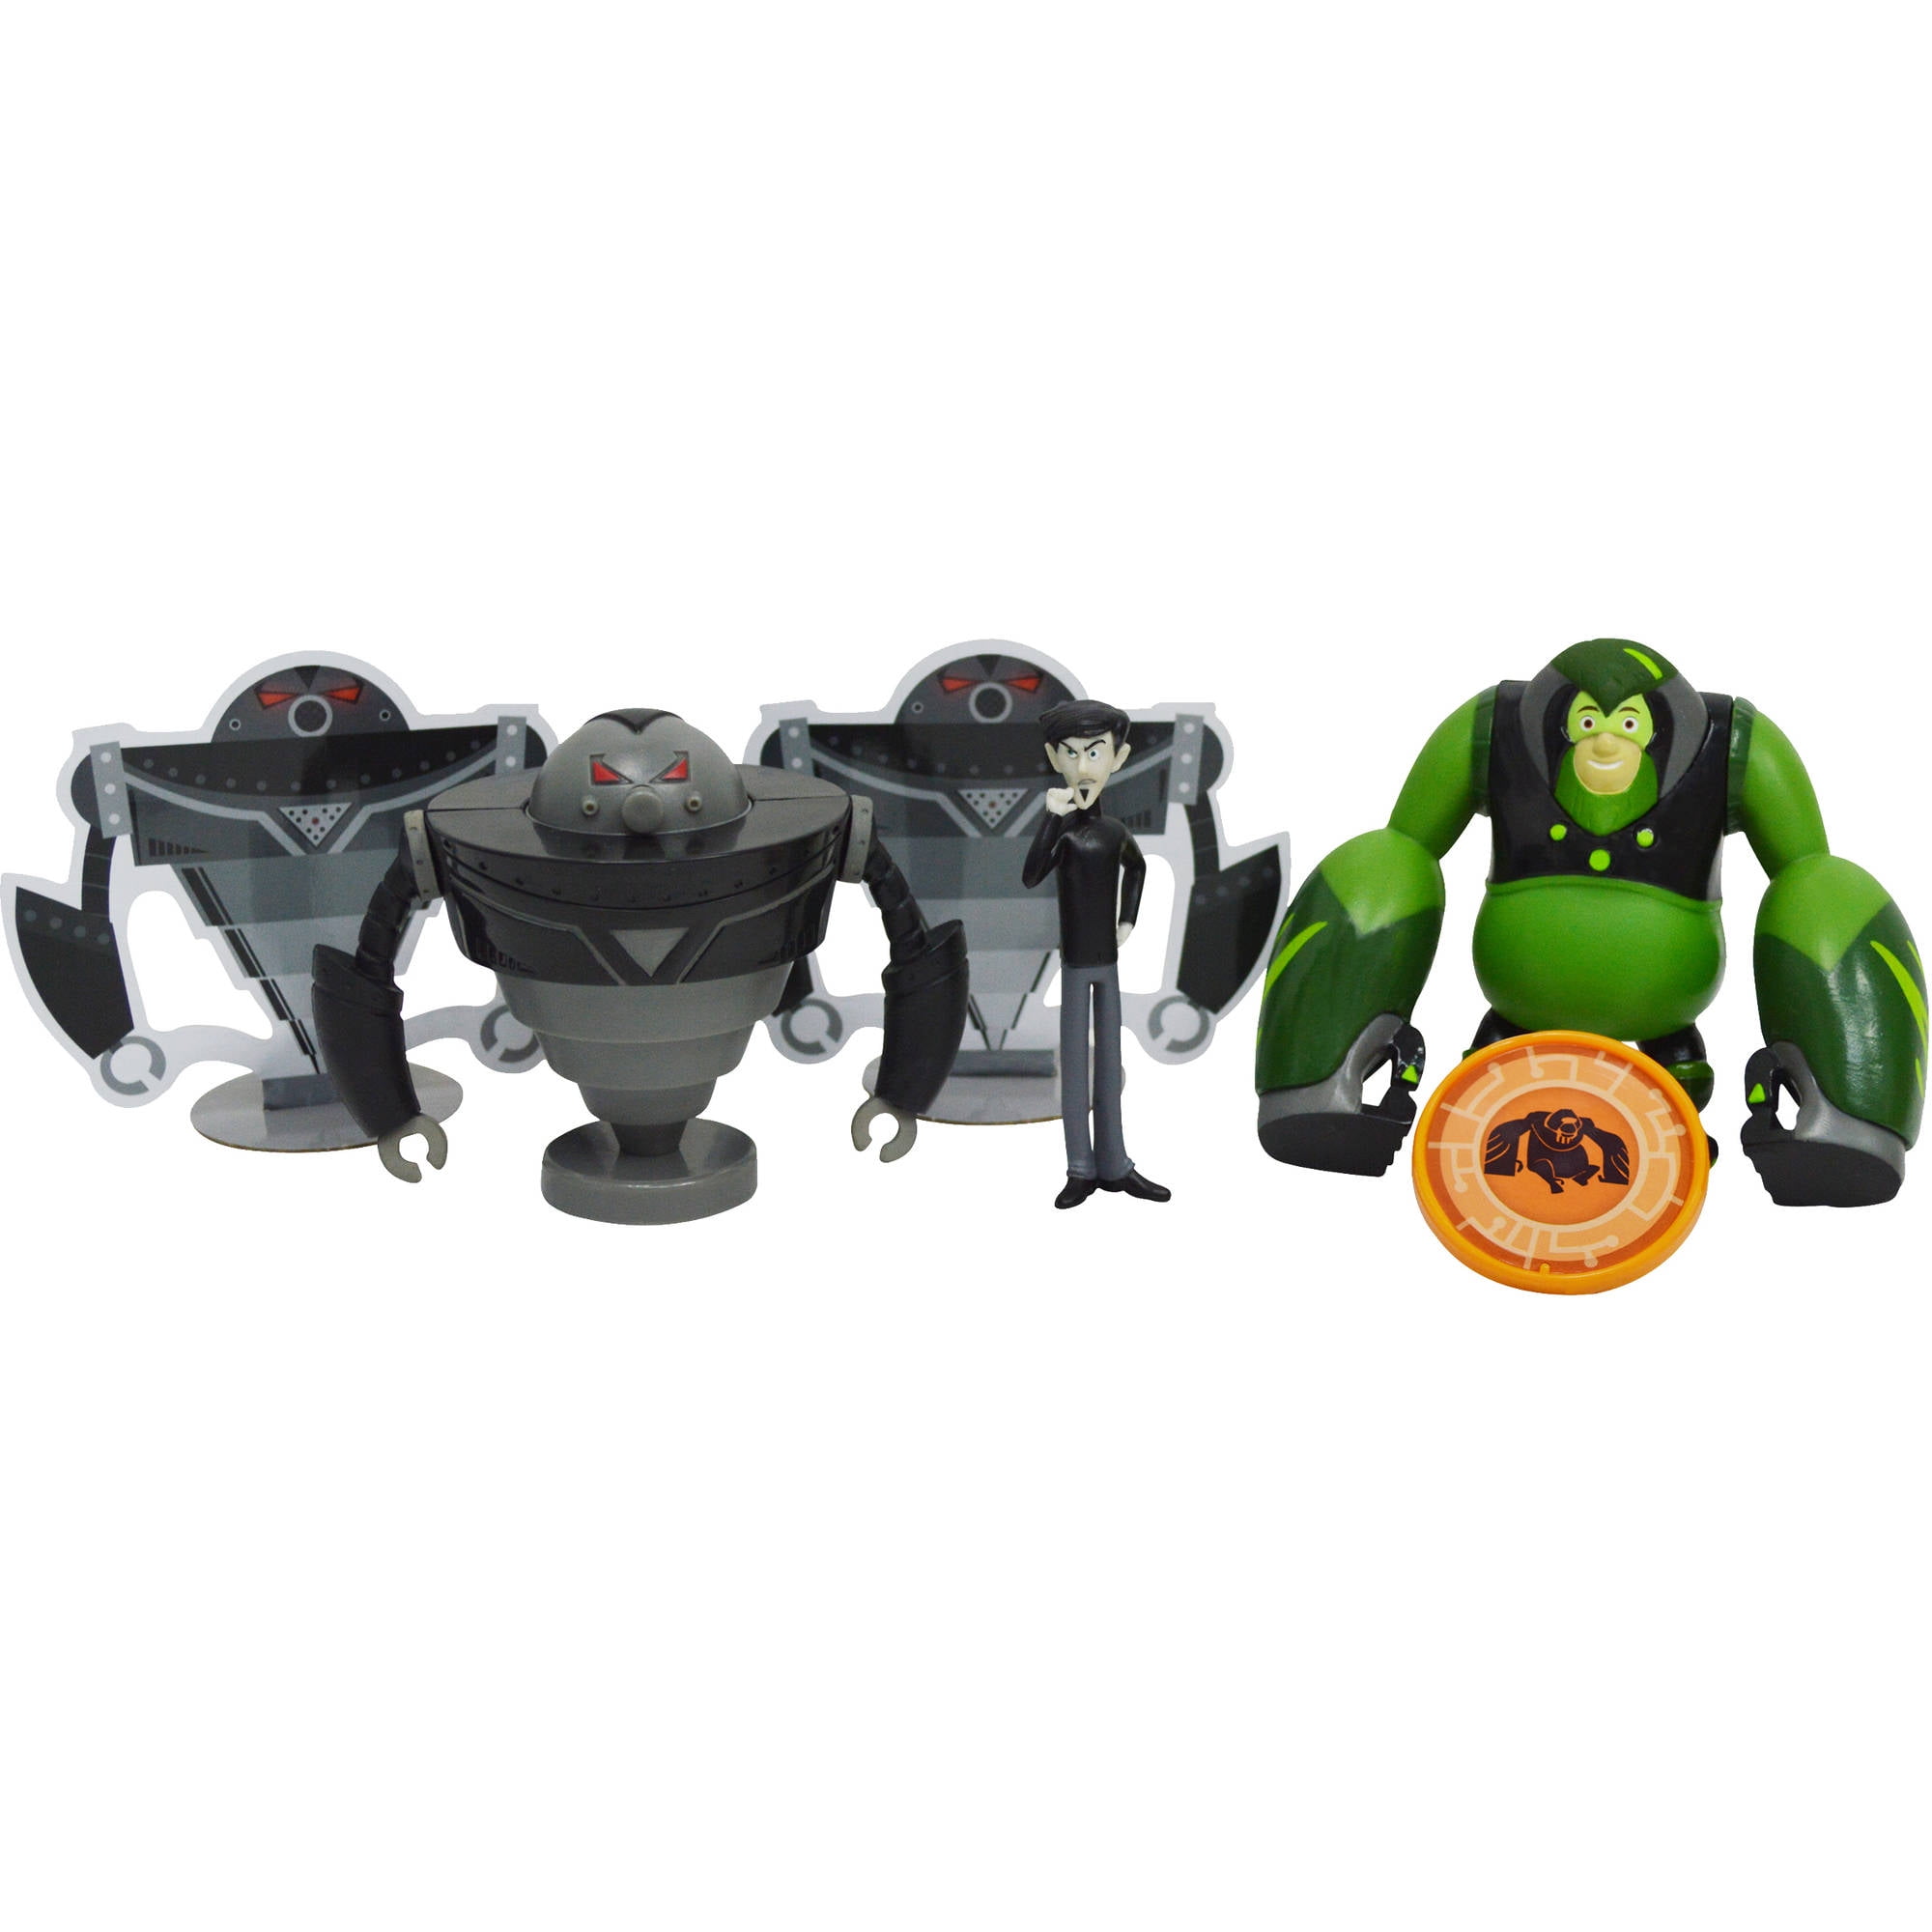 Wild Kratts Adventure Set Now You Can Create Your Own Creature Adventures With 